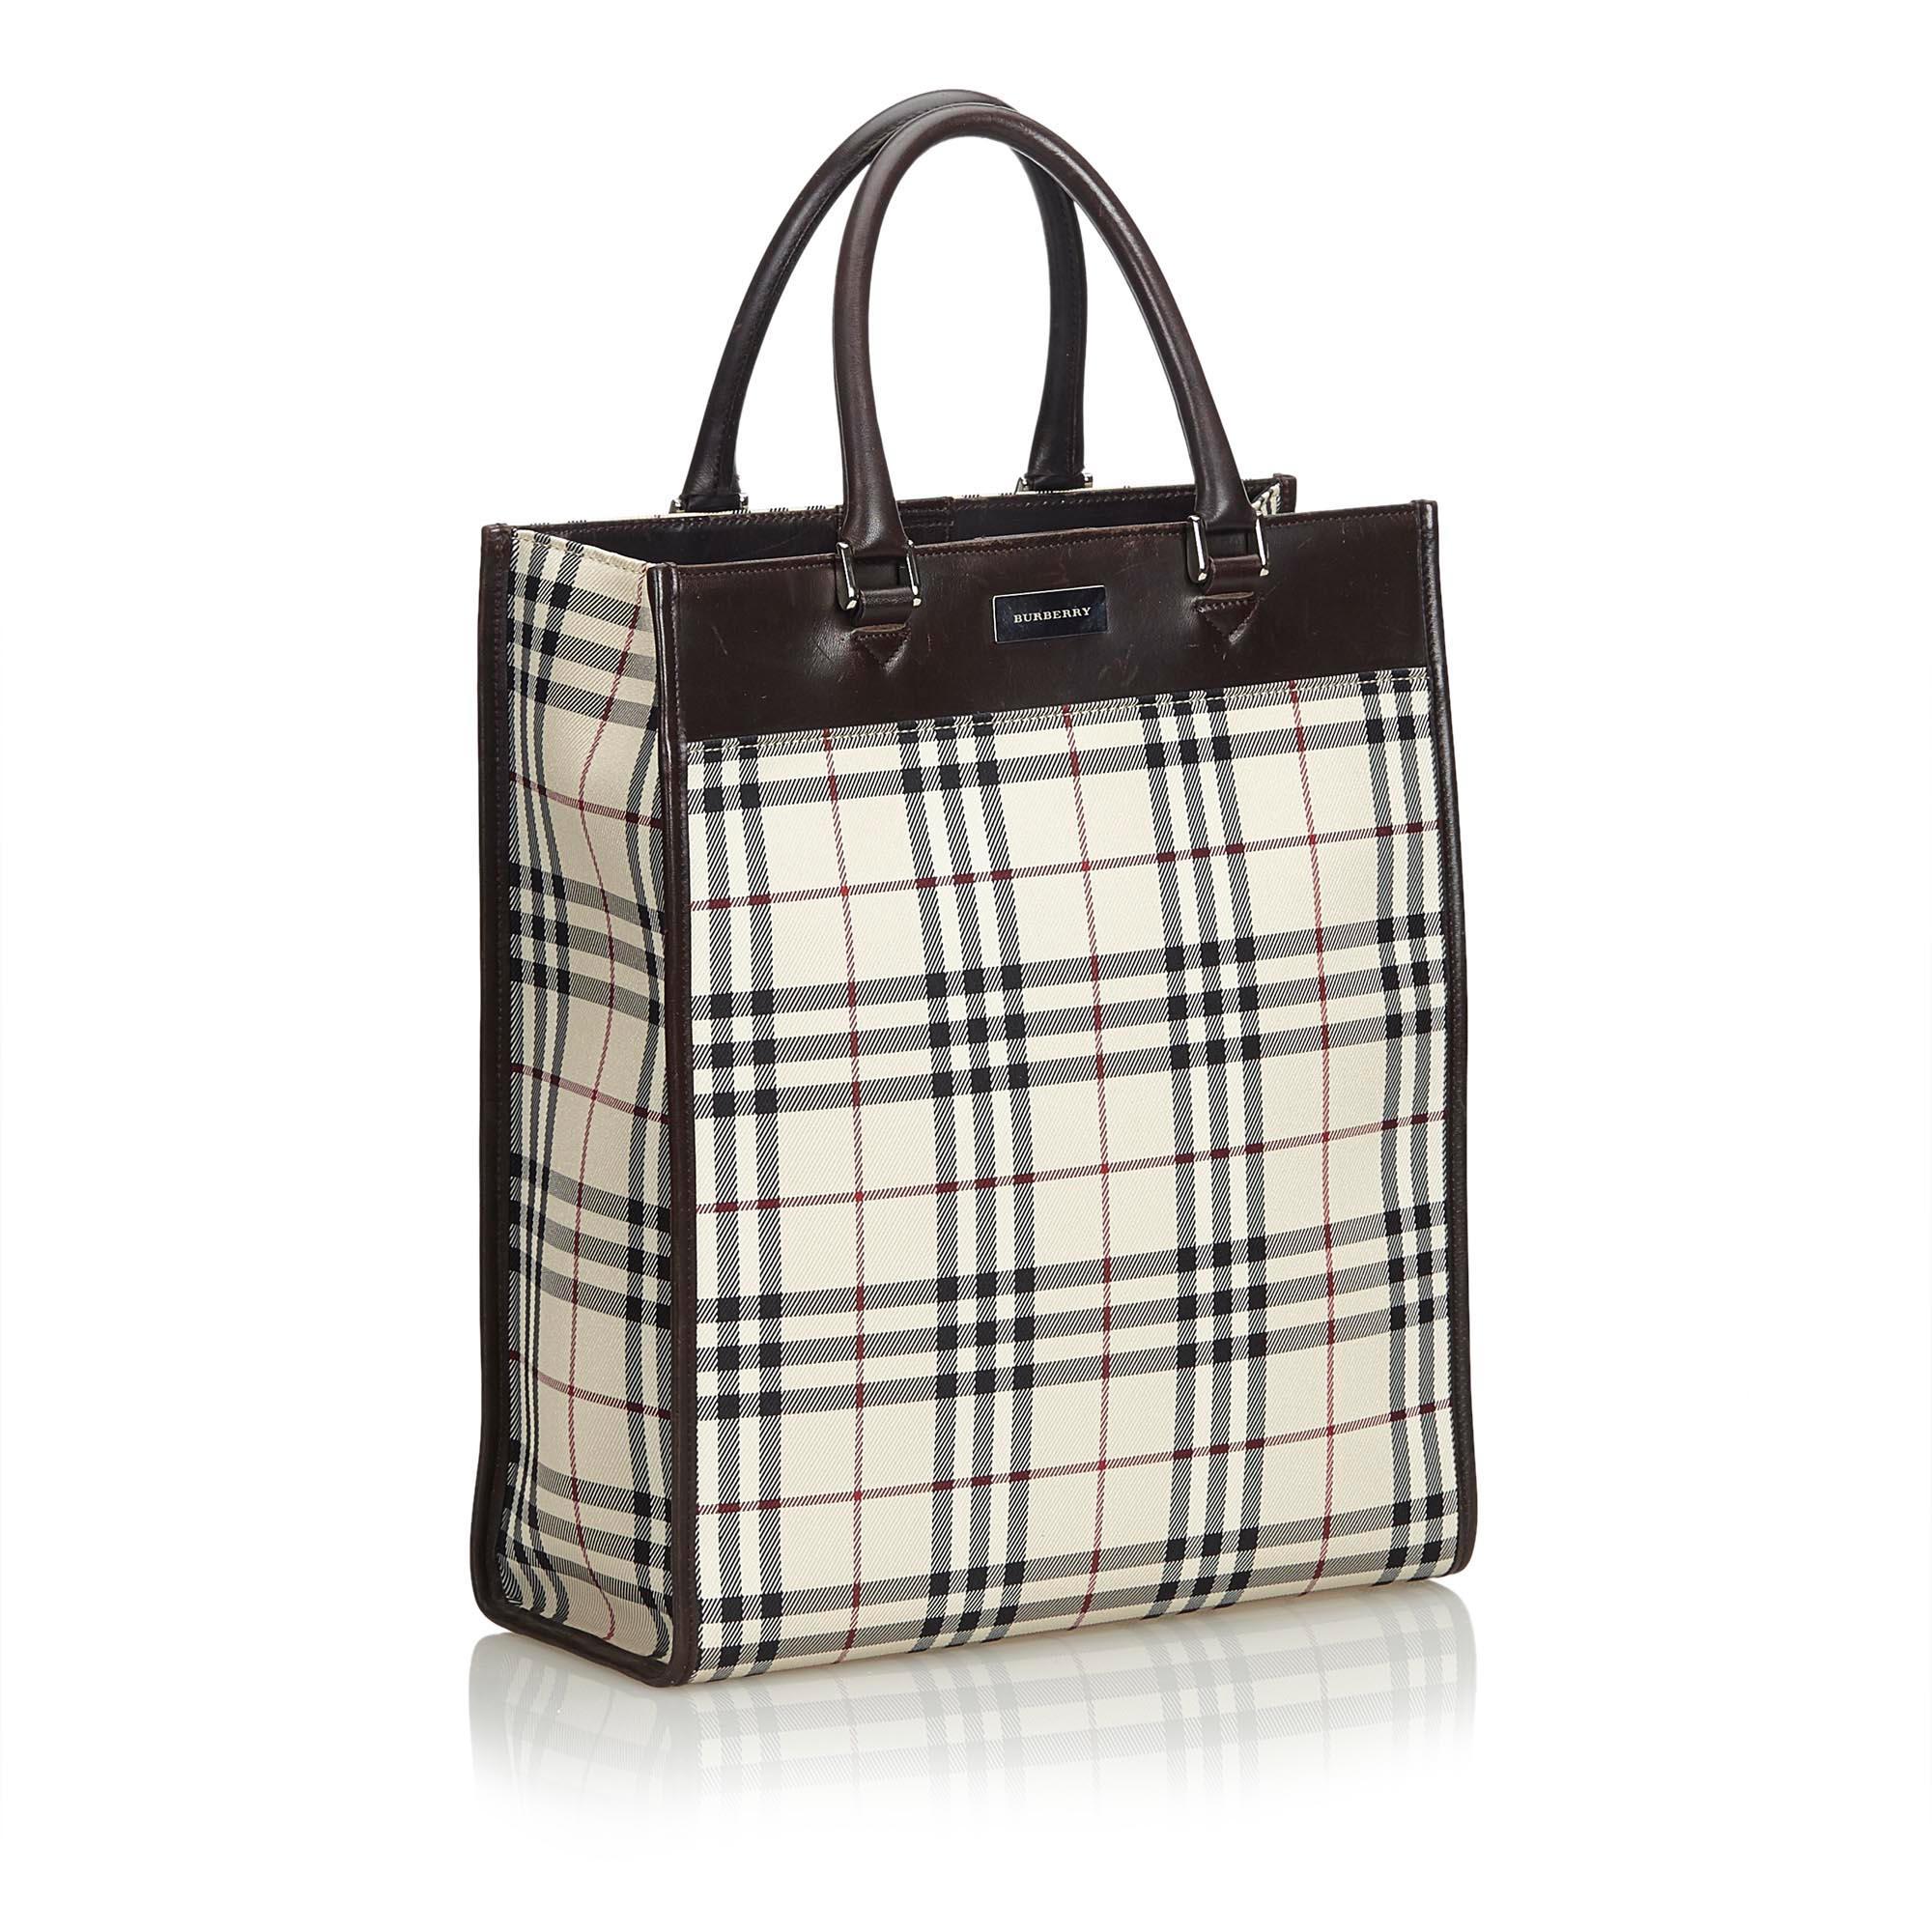 This tote features a plaid nylon body with a top leather panel, rolled leather handles, a top magnetic closure, and an interior zip pocket. It carries as B condition rating.

Inclusions: 
This item does not come with inclusions.

Dimensions:
Length: